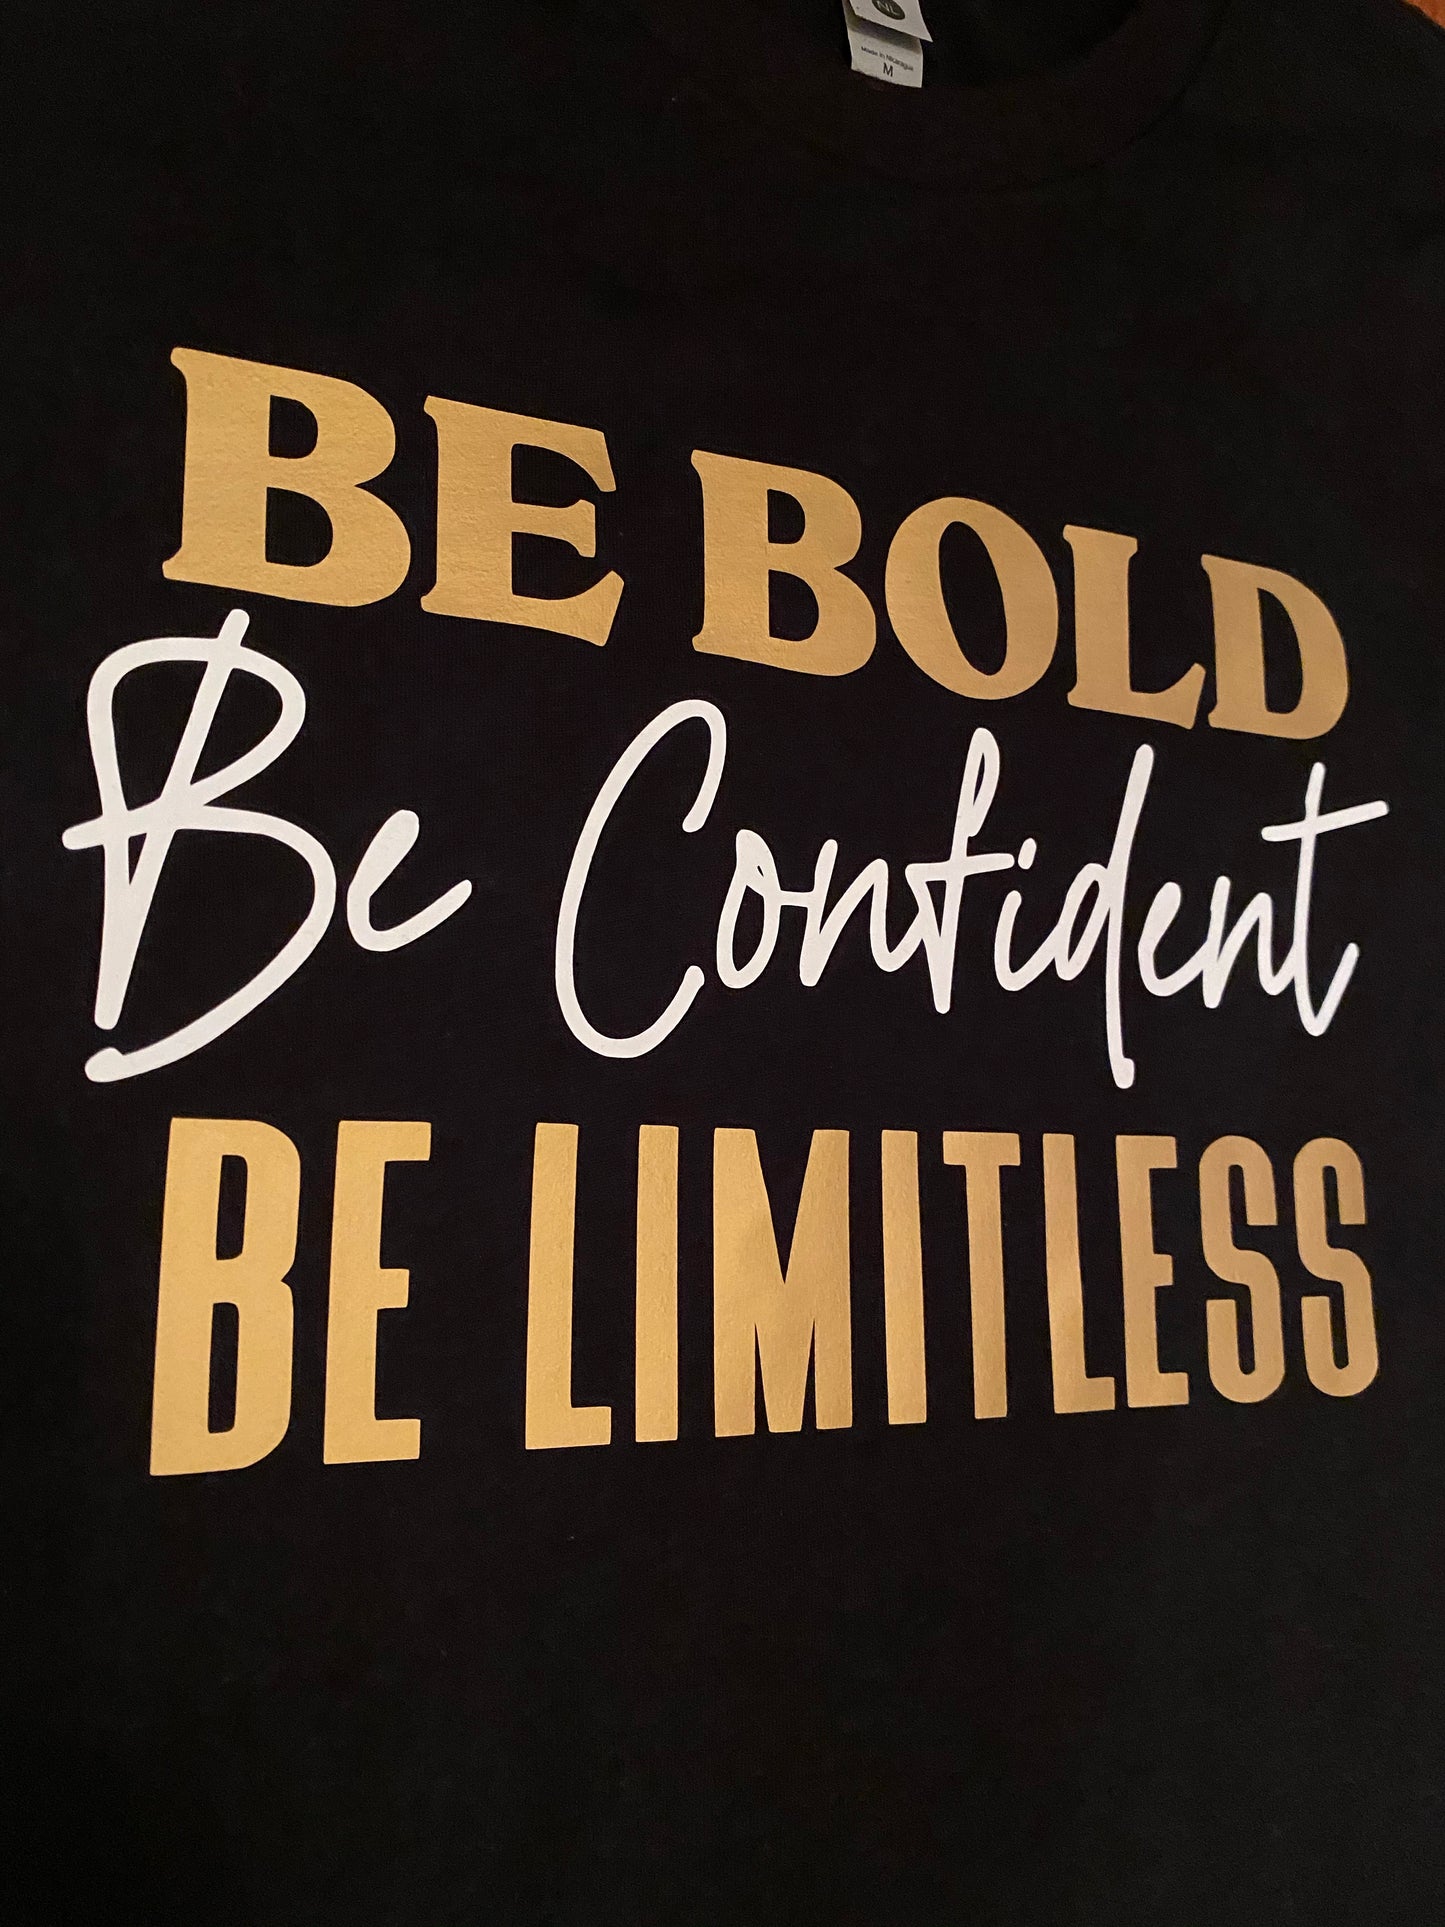 Be Bold, Confident, Limitless Tee